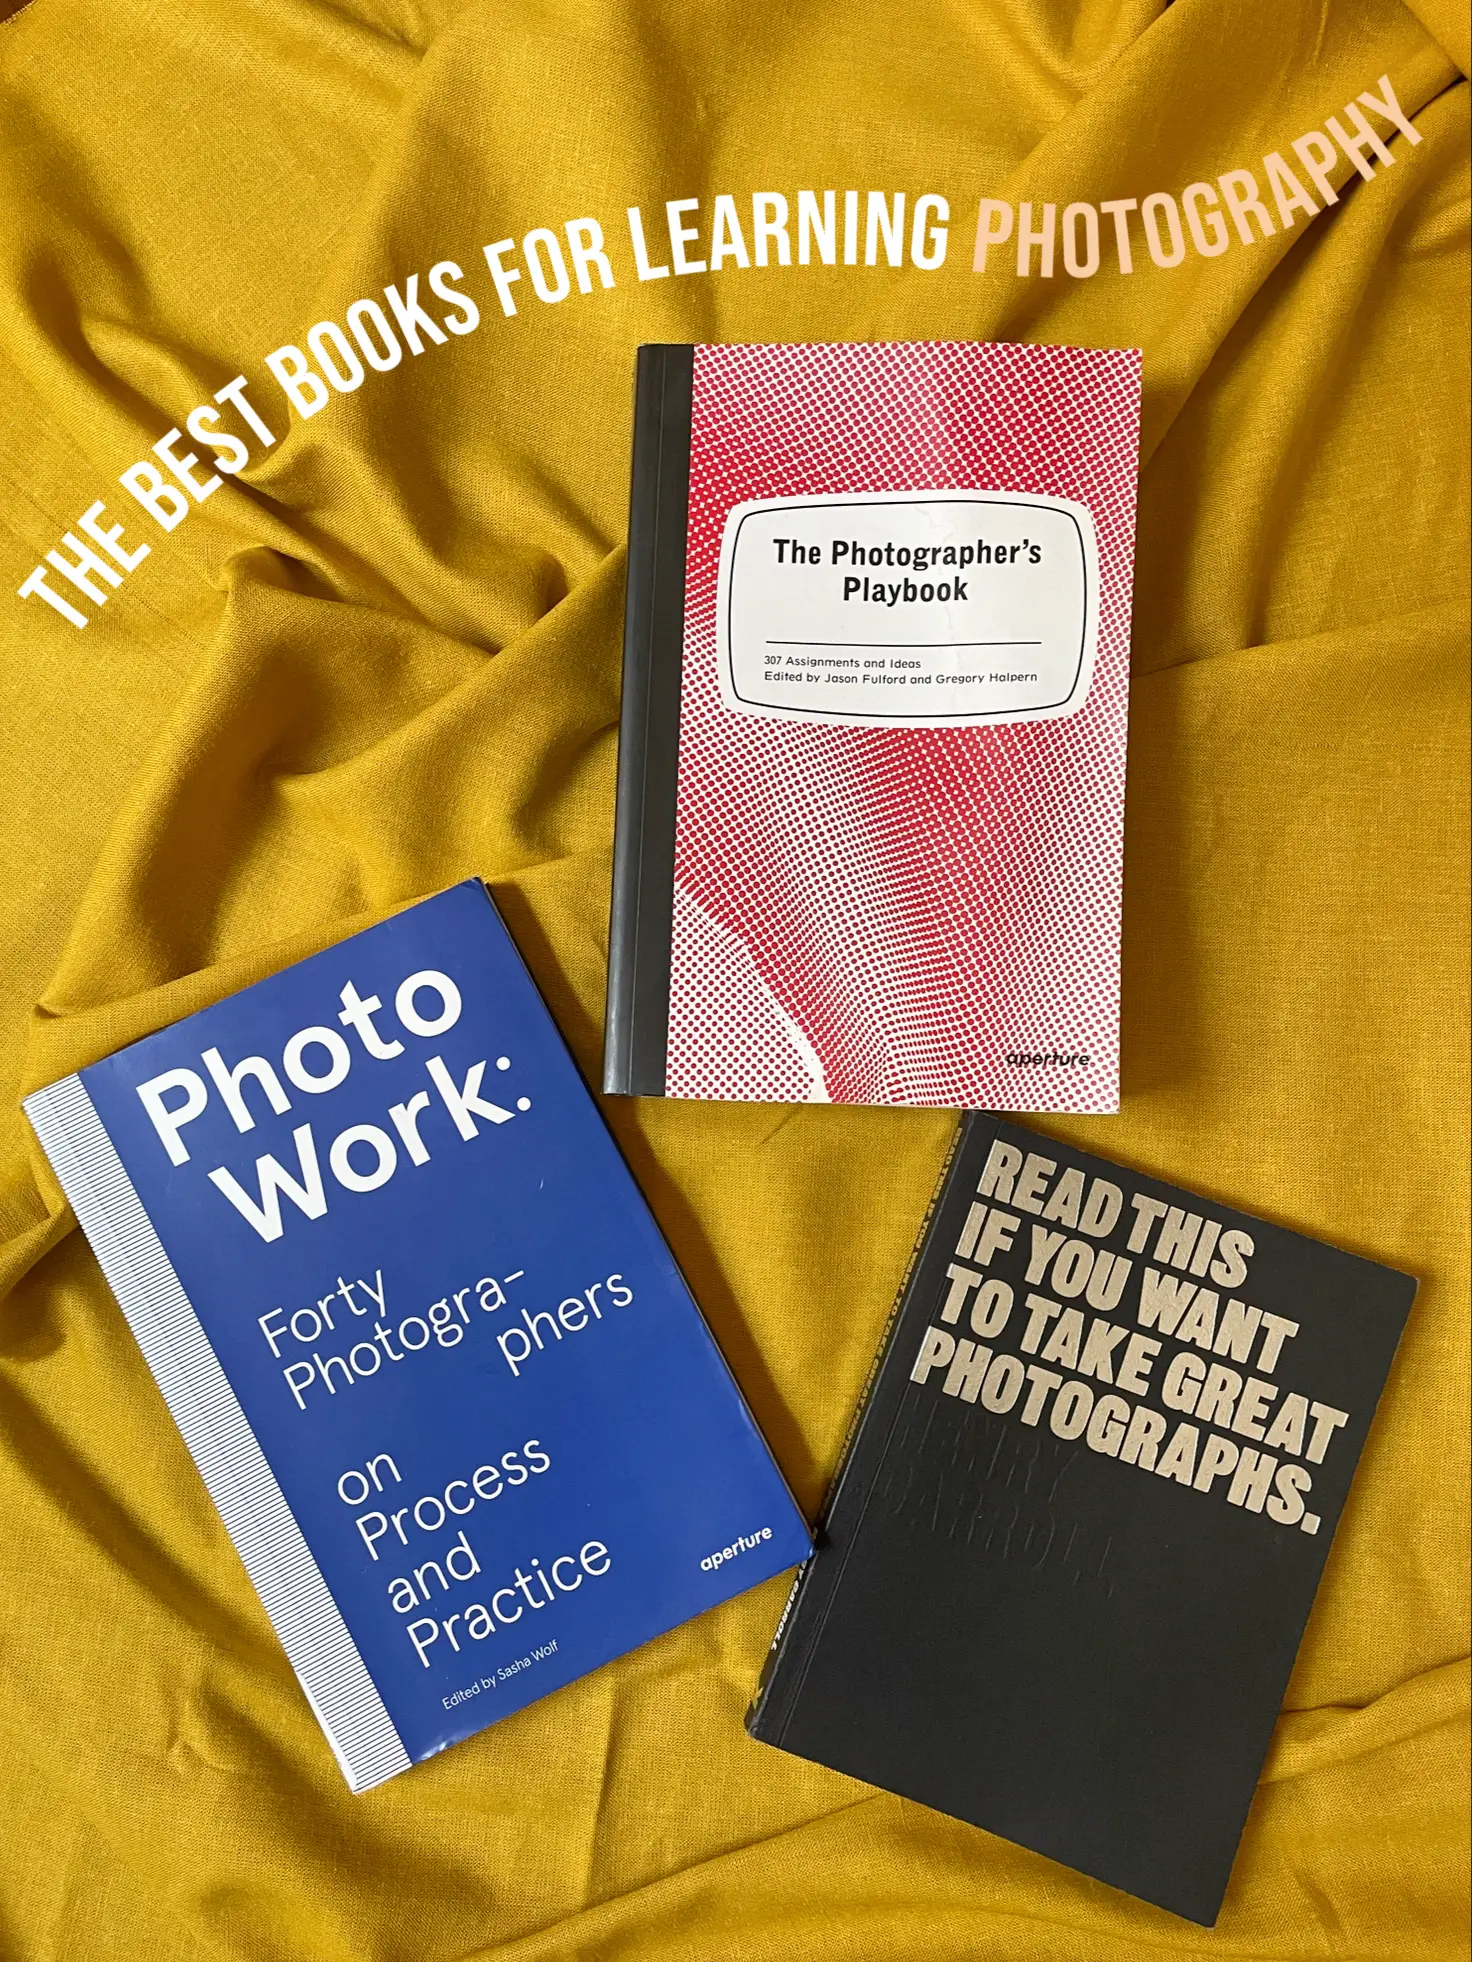 The Best Books for Learning Photography, Gallery posted by AlexPhoto